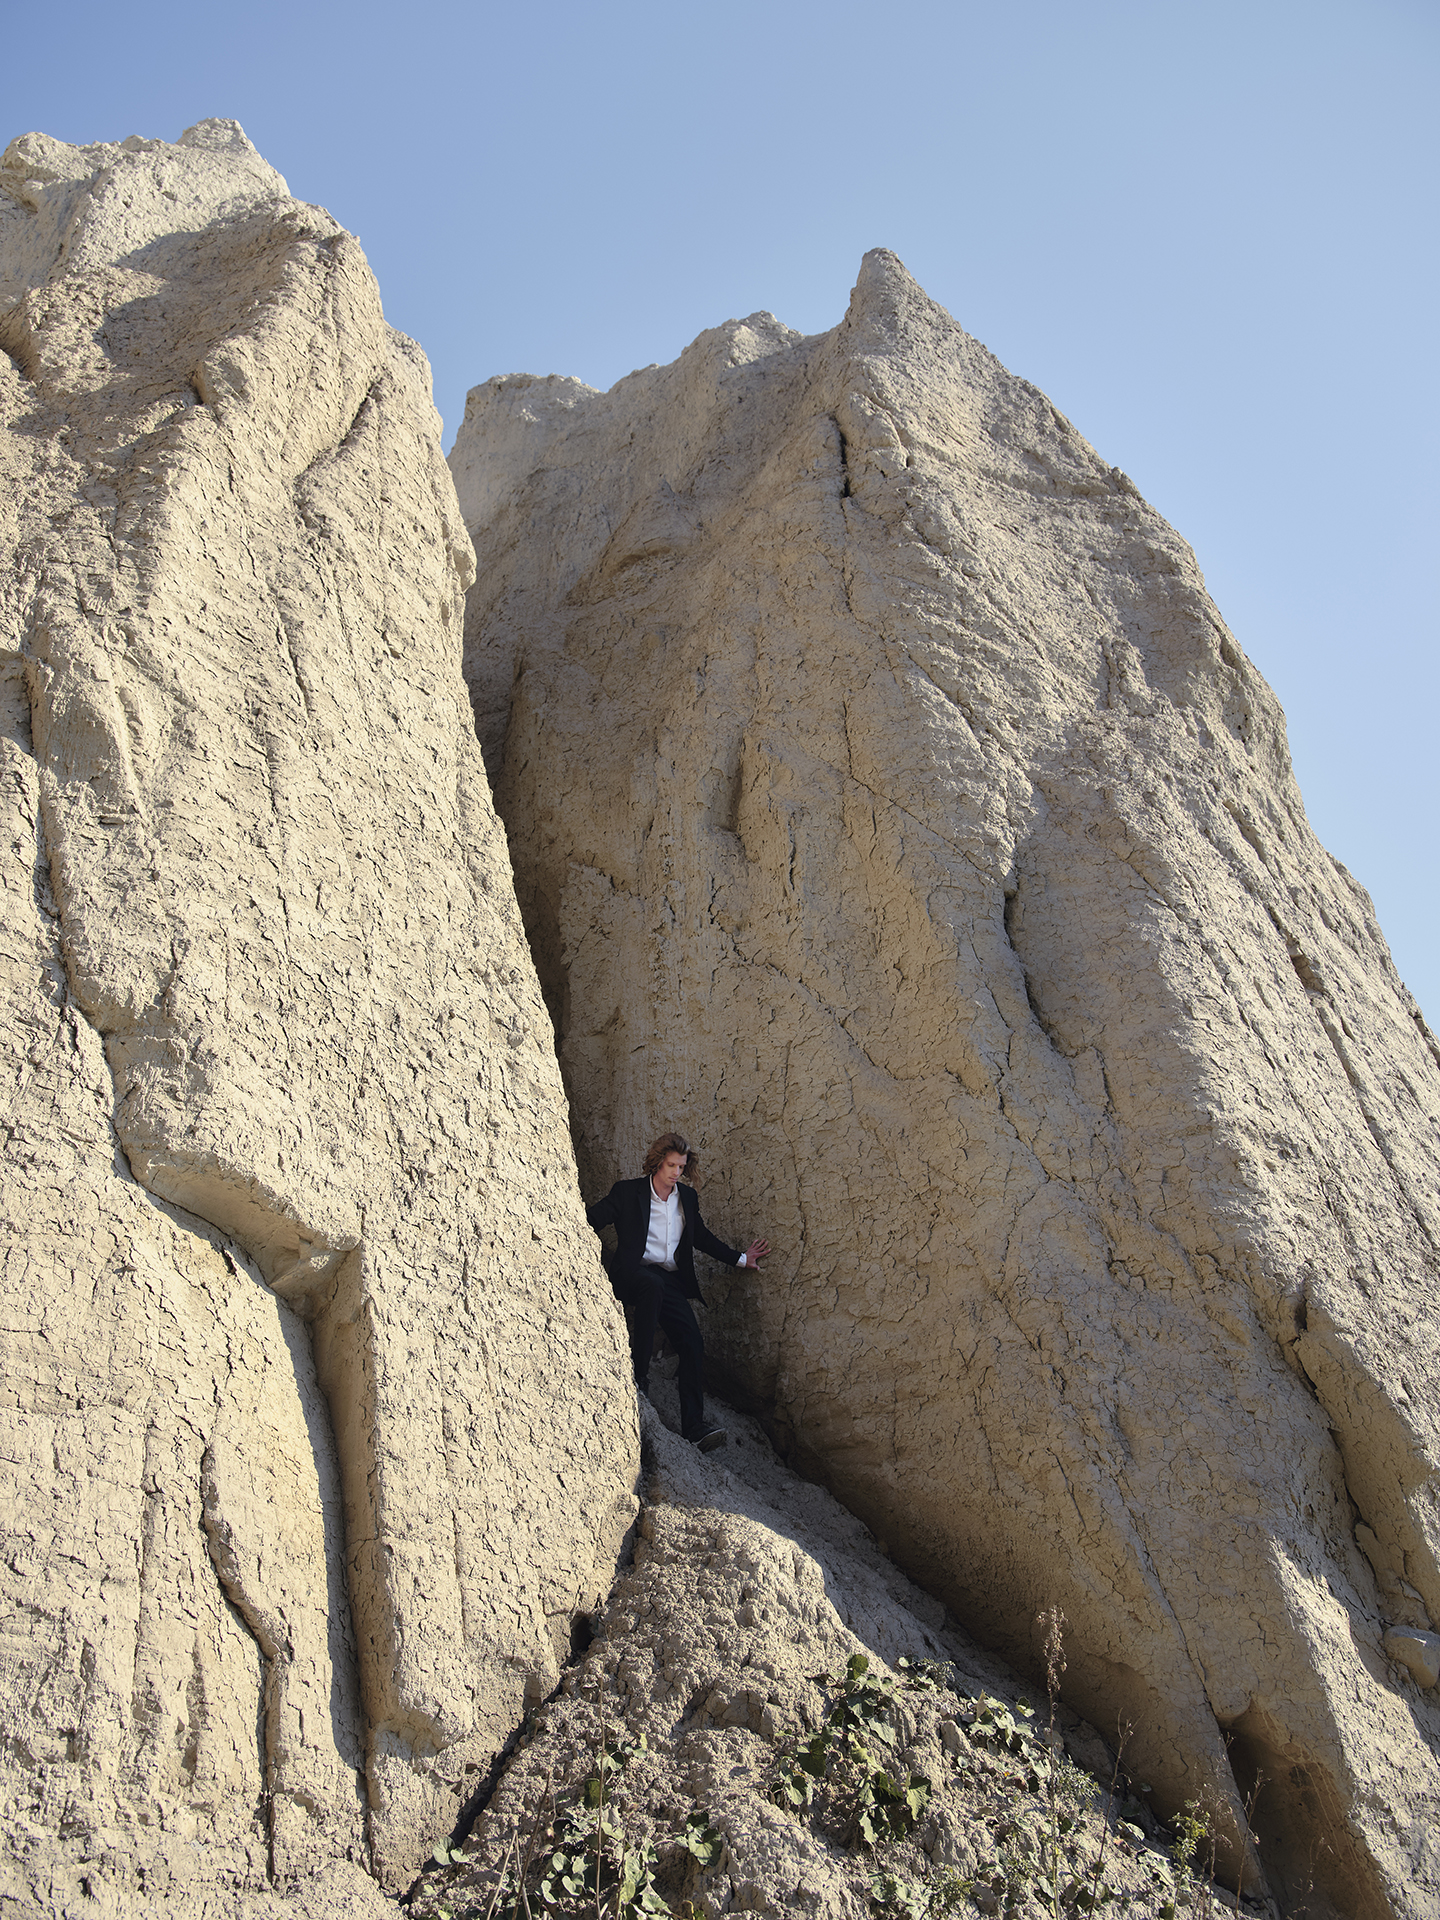 In this image, a white man wearing a black suit and white shirt is descending a spacing between two large stone structures. He is holding on to both sides and so he will not lose balance. The rocks have a grey- yellow tint to them that contrasts the blue sky.